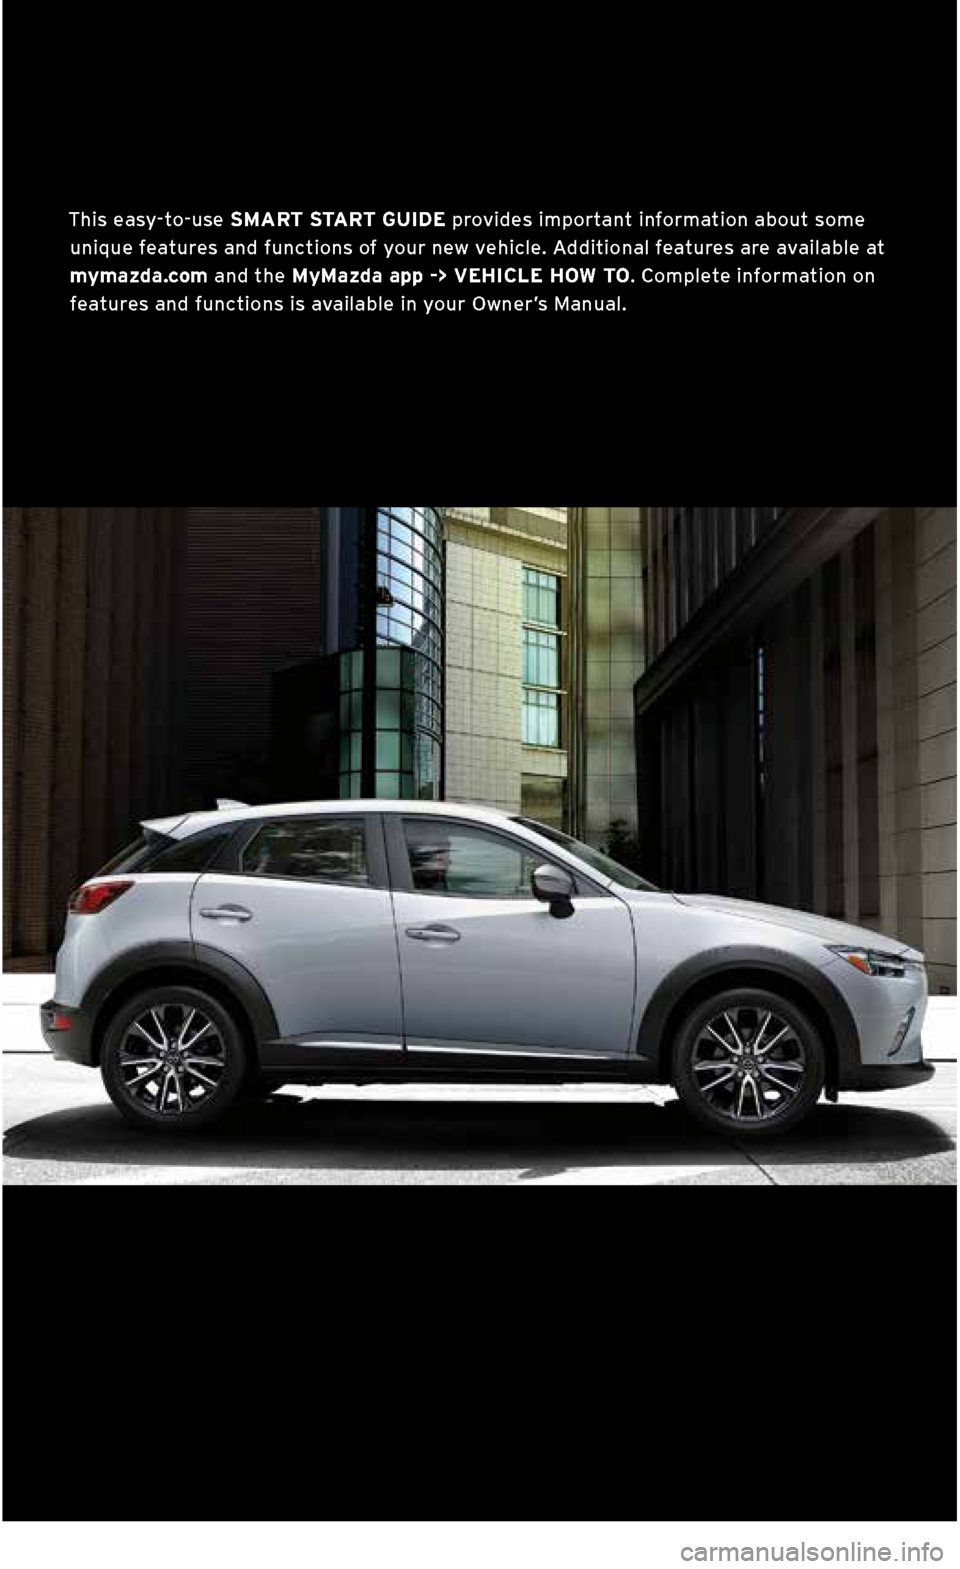 MAZDA MODEL CX-3 2018  Smart Start Guide (in English) This easy\fto\fuse SMART START GUIDE provides important information about some unique features and functions of your new vehicle. Additional features are available at mymazda.com and the MyMazda app -